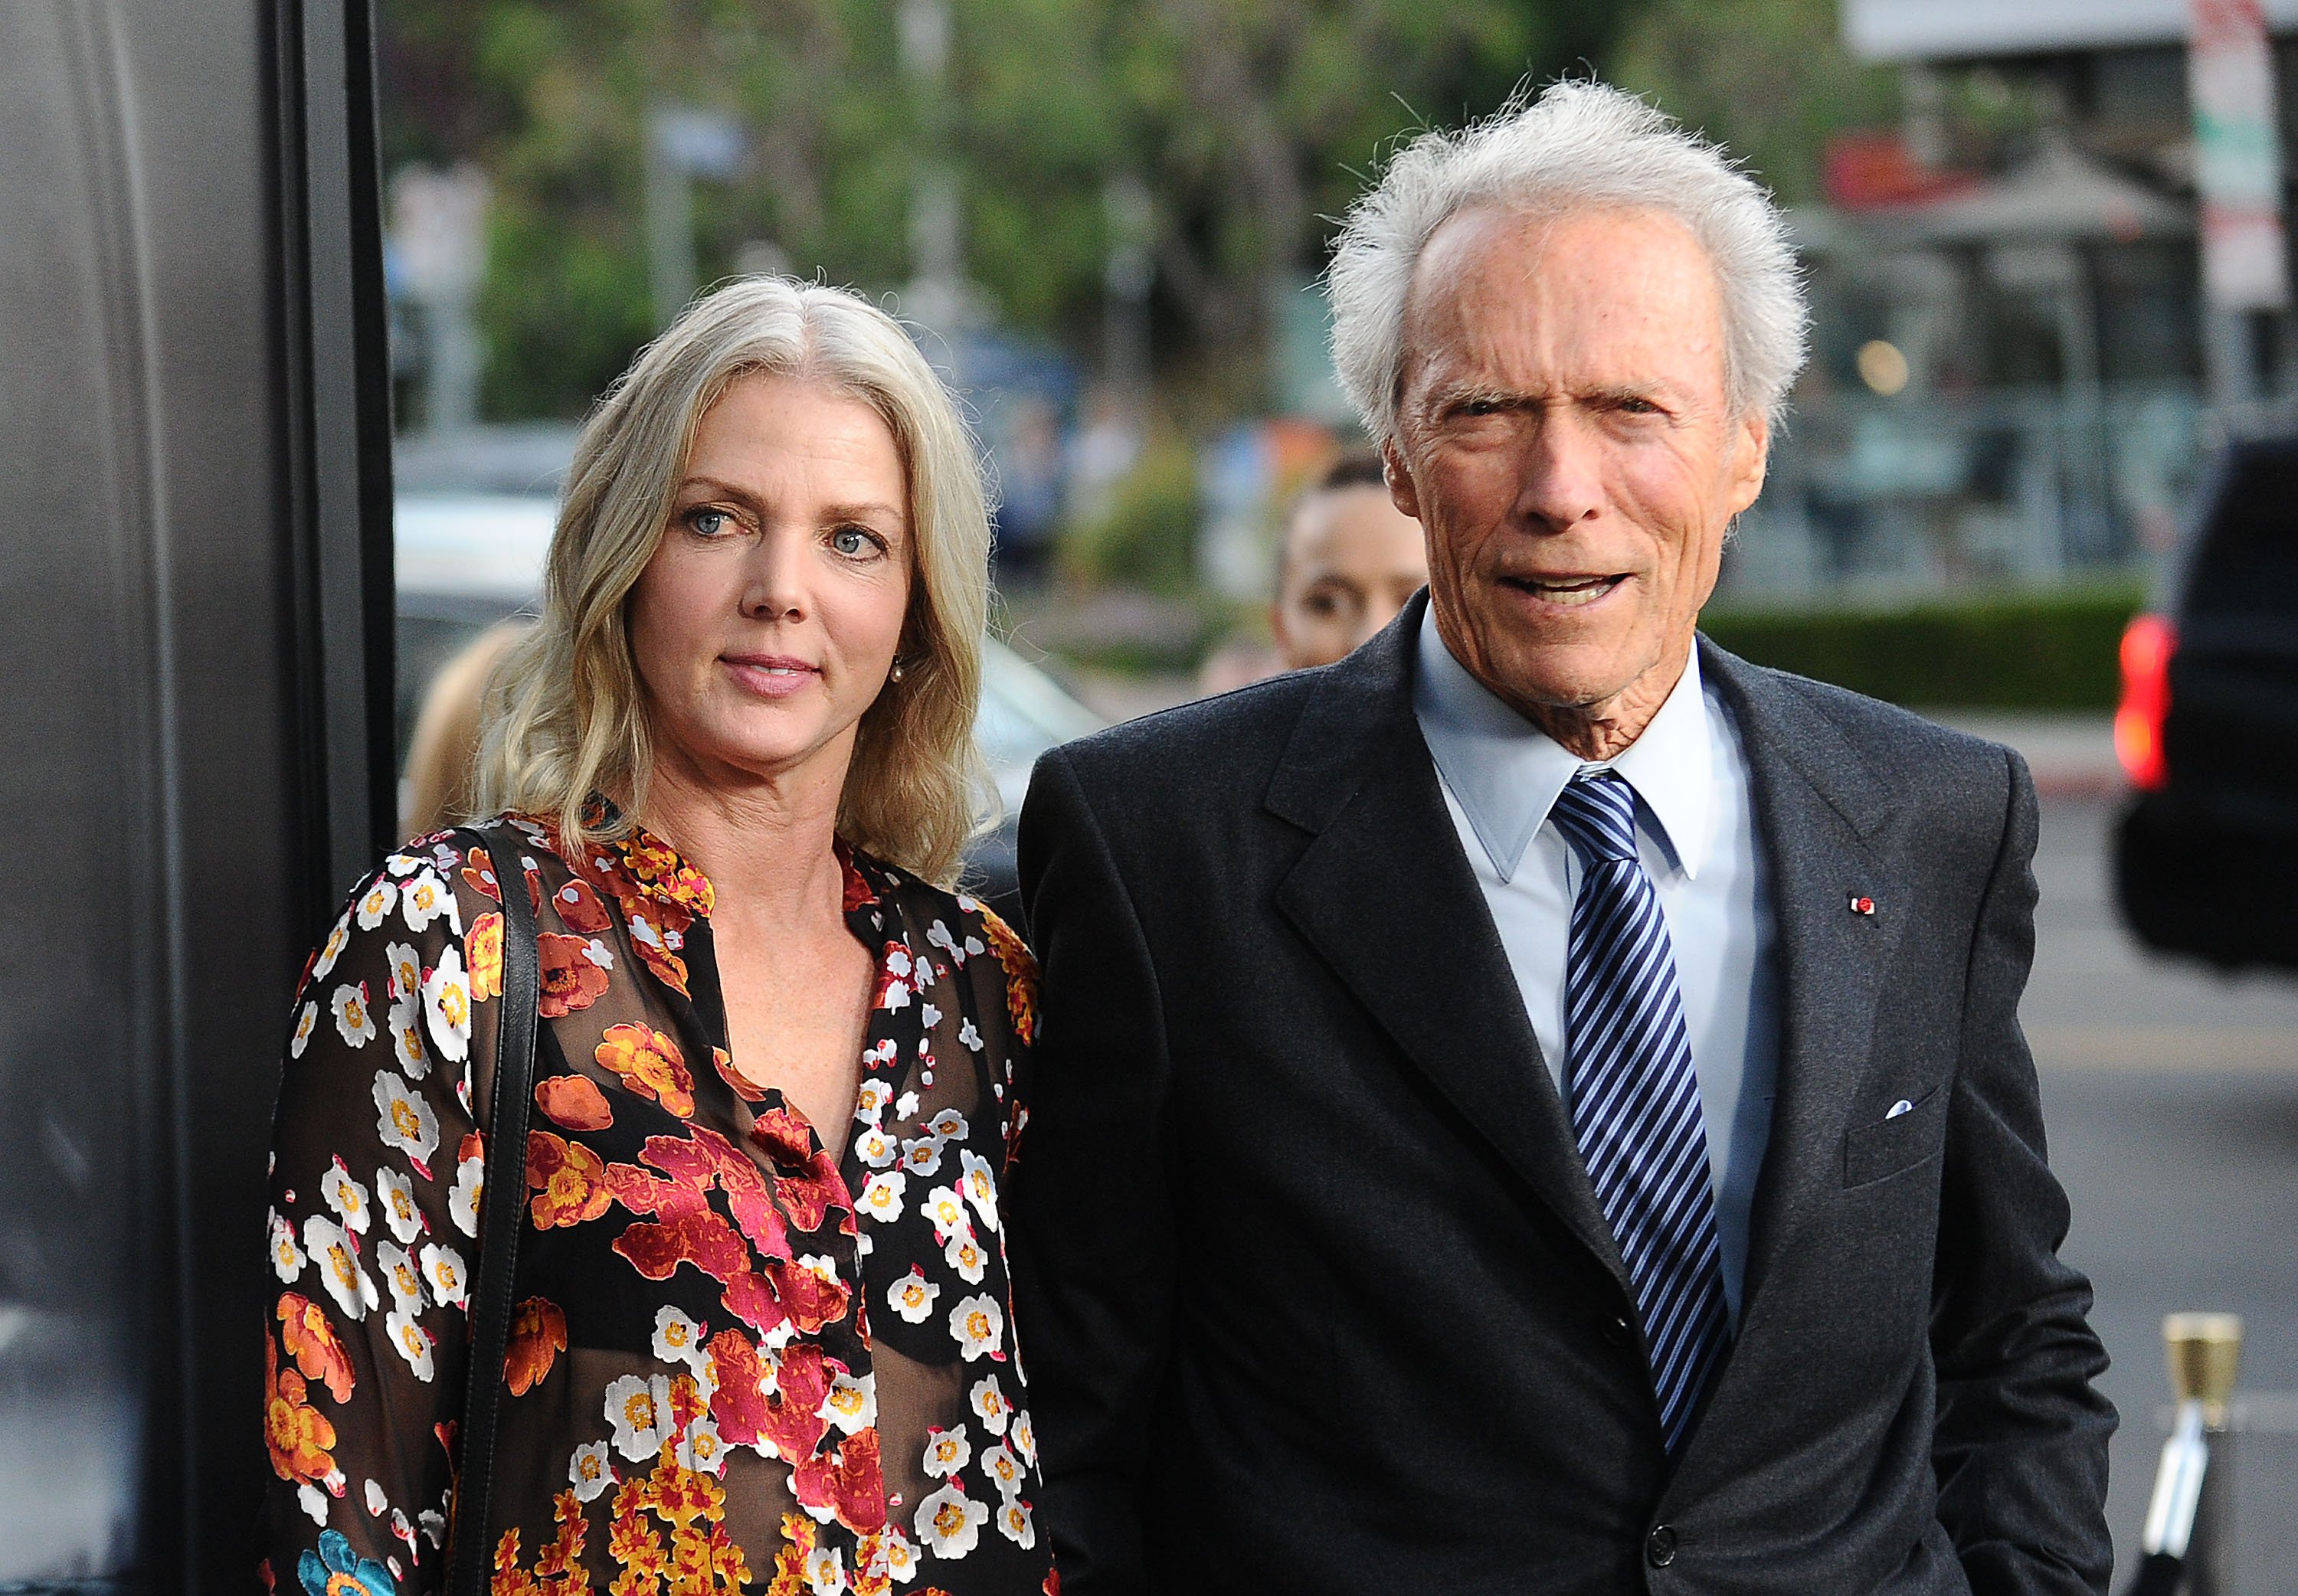 Christina Sandera and Clint Eastwood at a screening of "Sully" at Directors Guild of America on September 8, 2016, in Los Angeles, California | Source: Getty Images